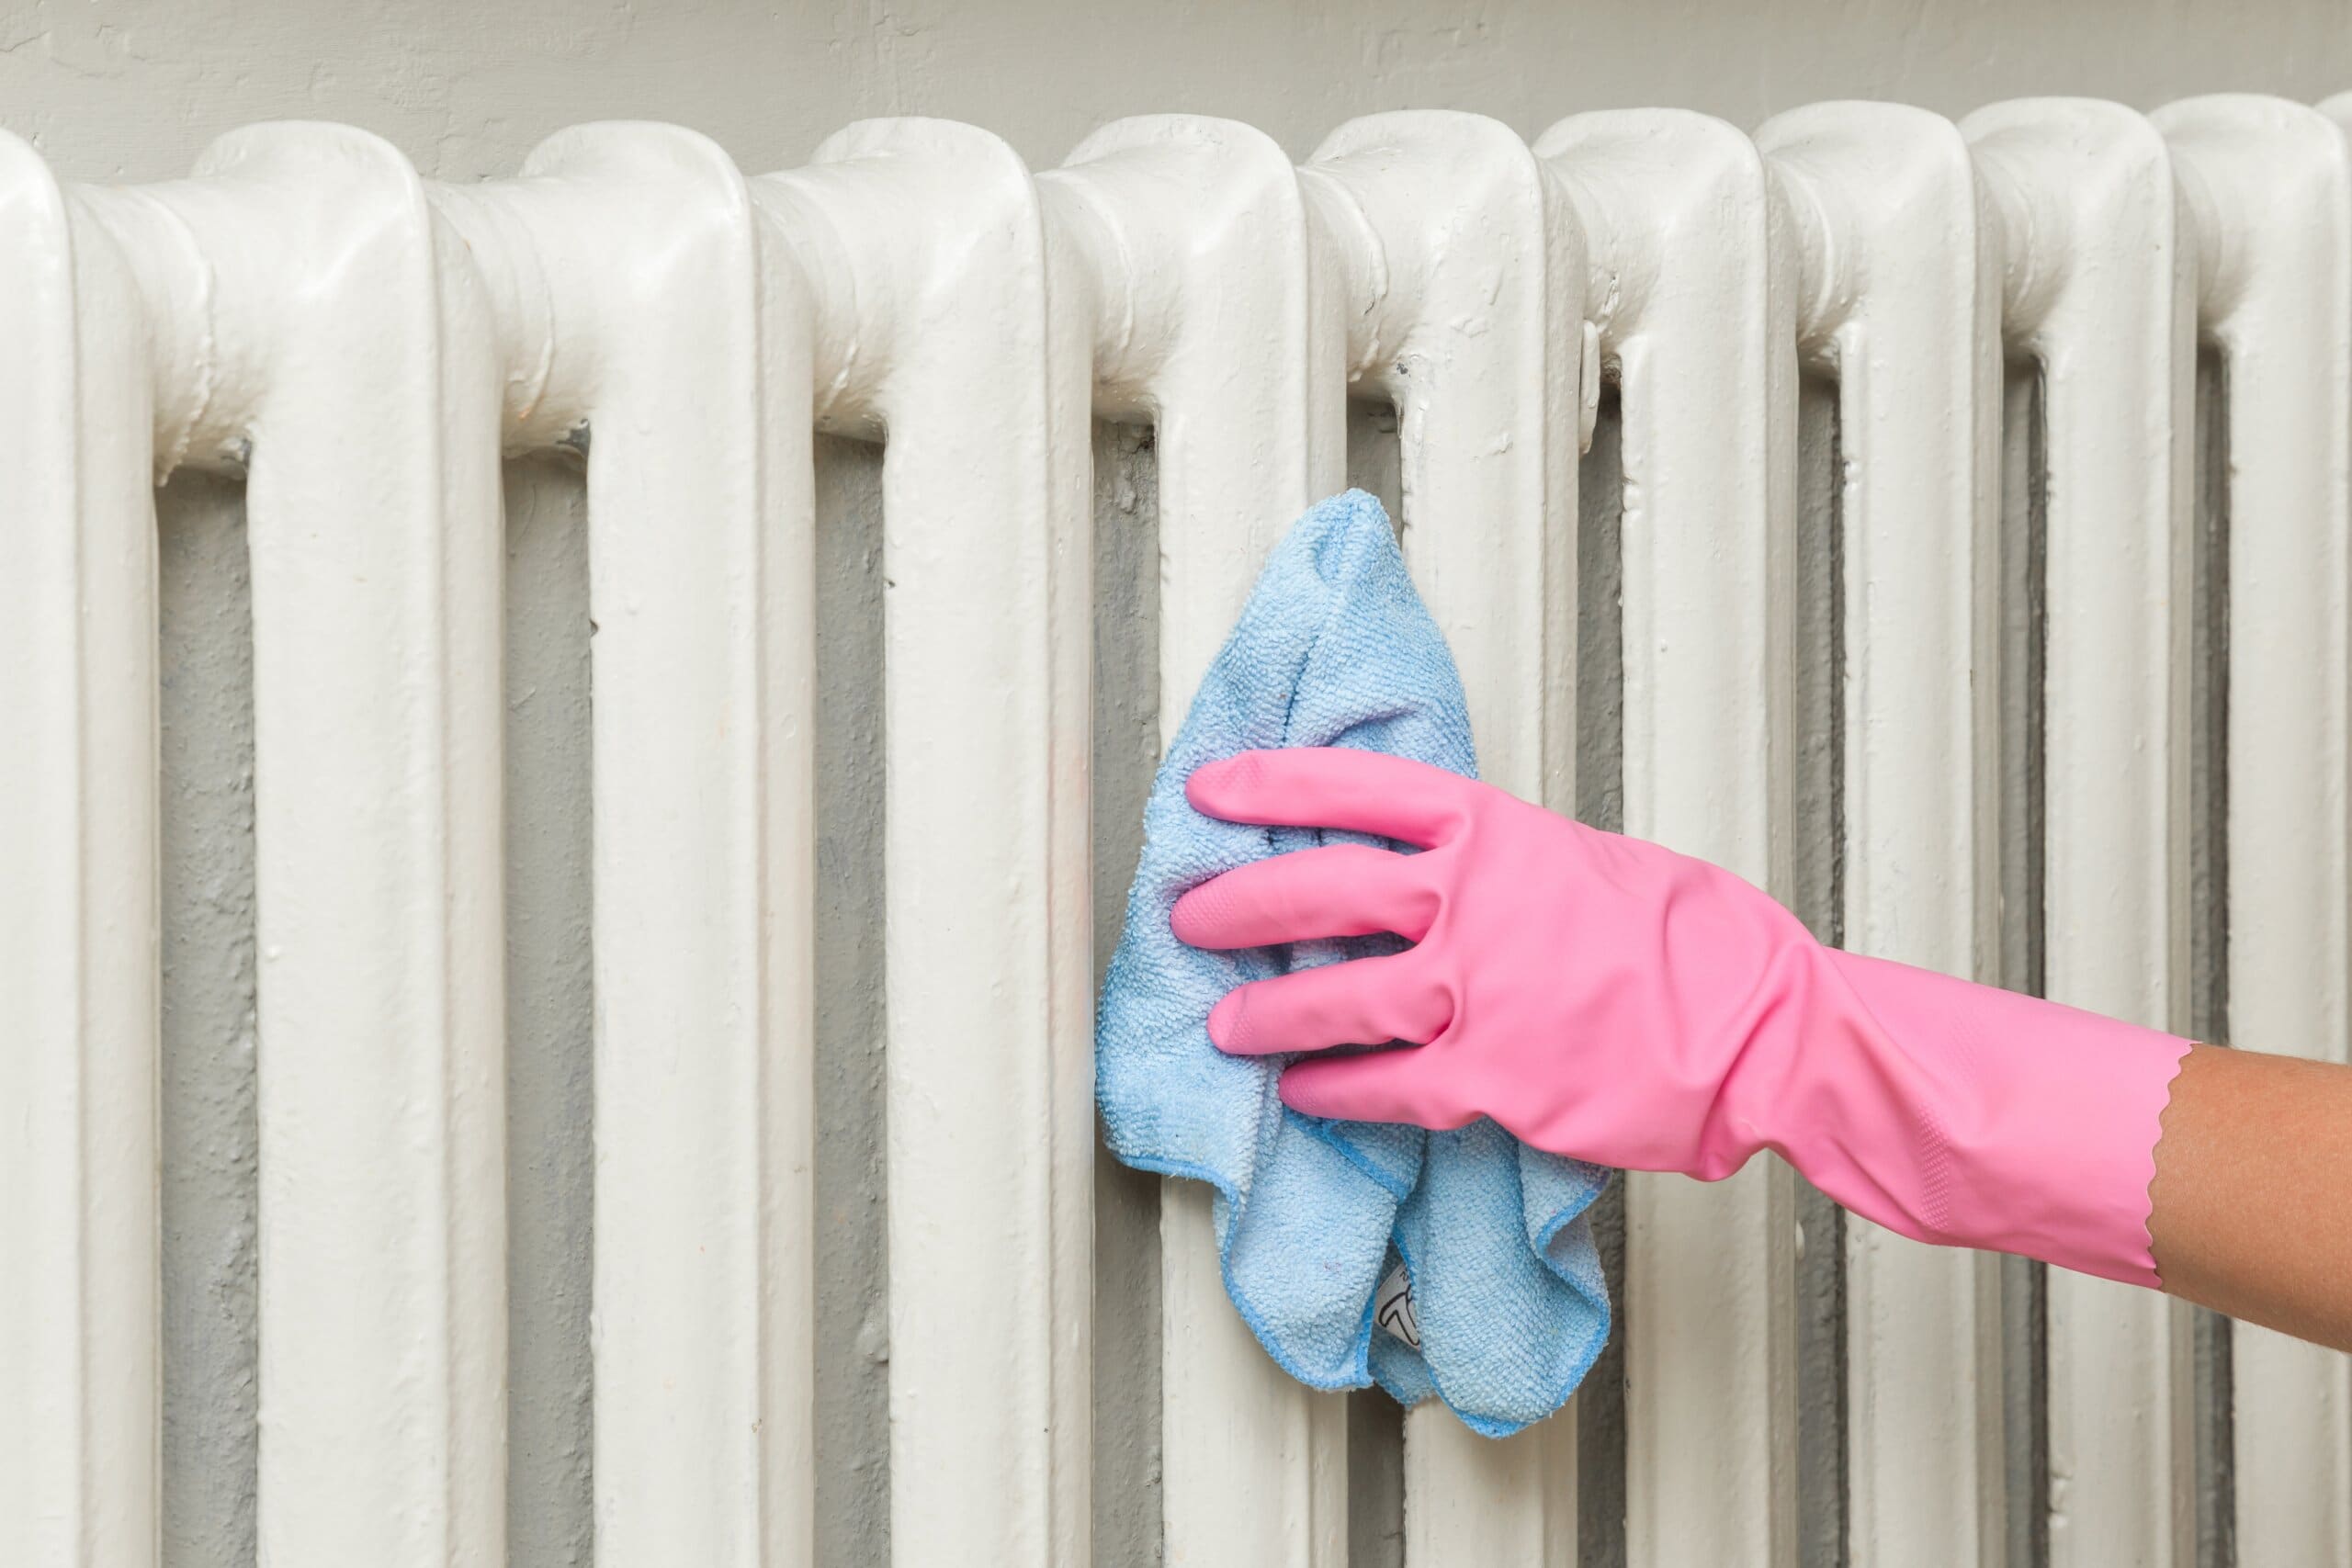 Hands with pink gloves on wiping a cloth over a radiator.